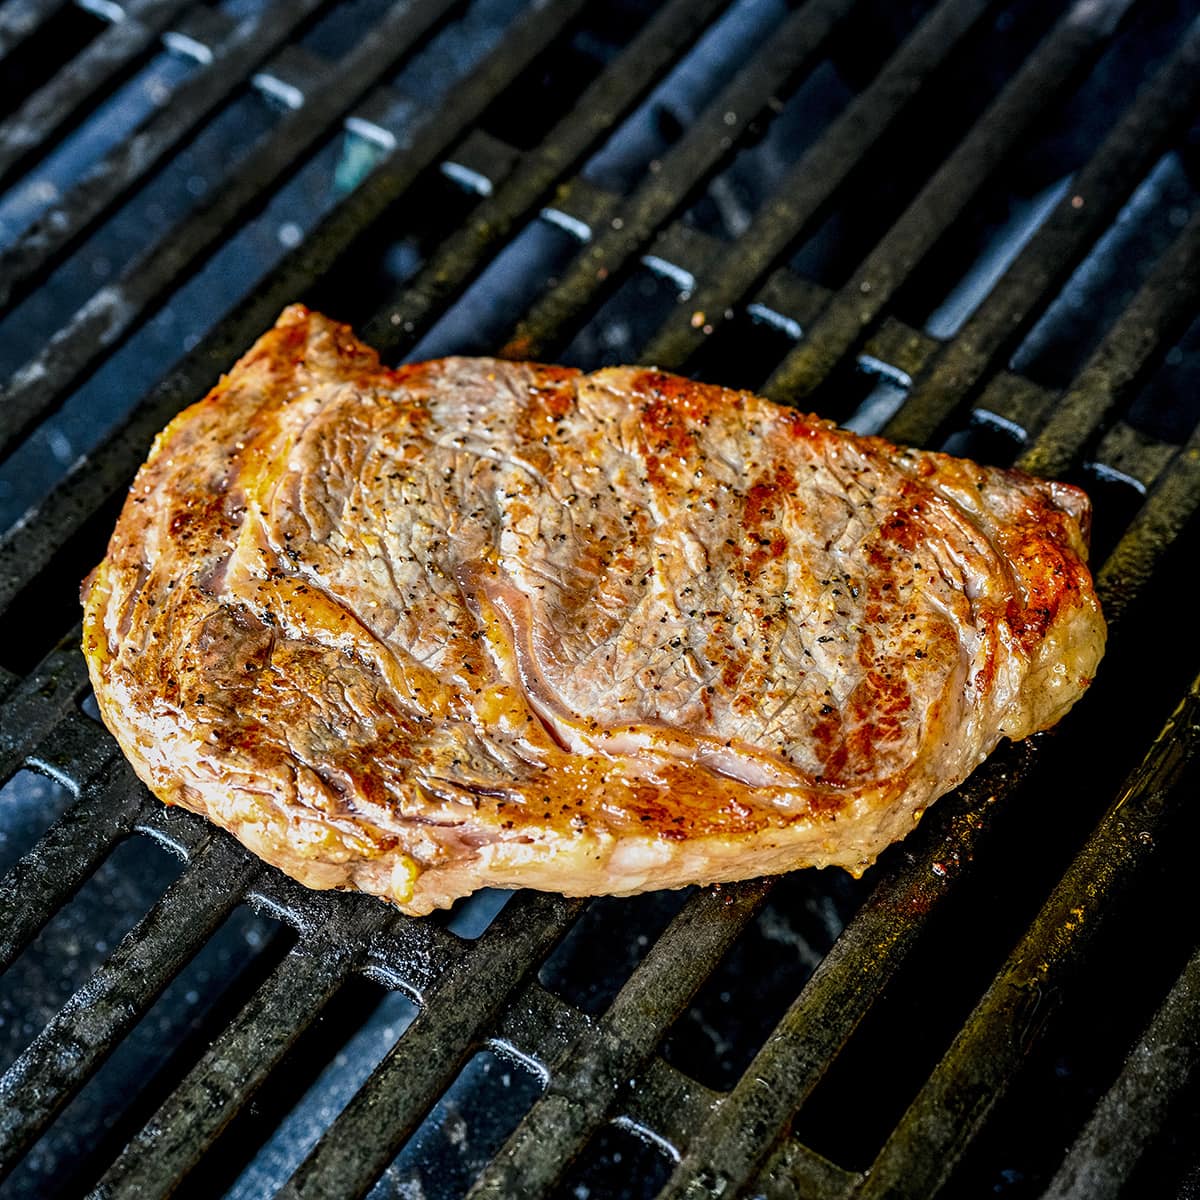 Steak grilled to perfection on a grill.